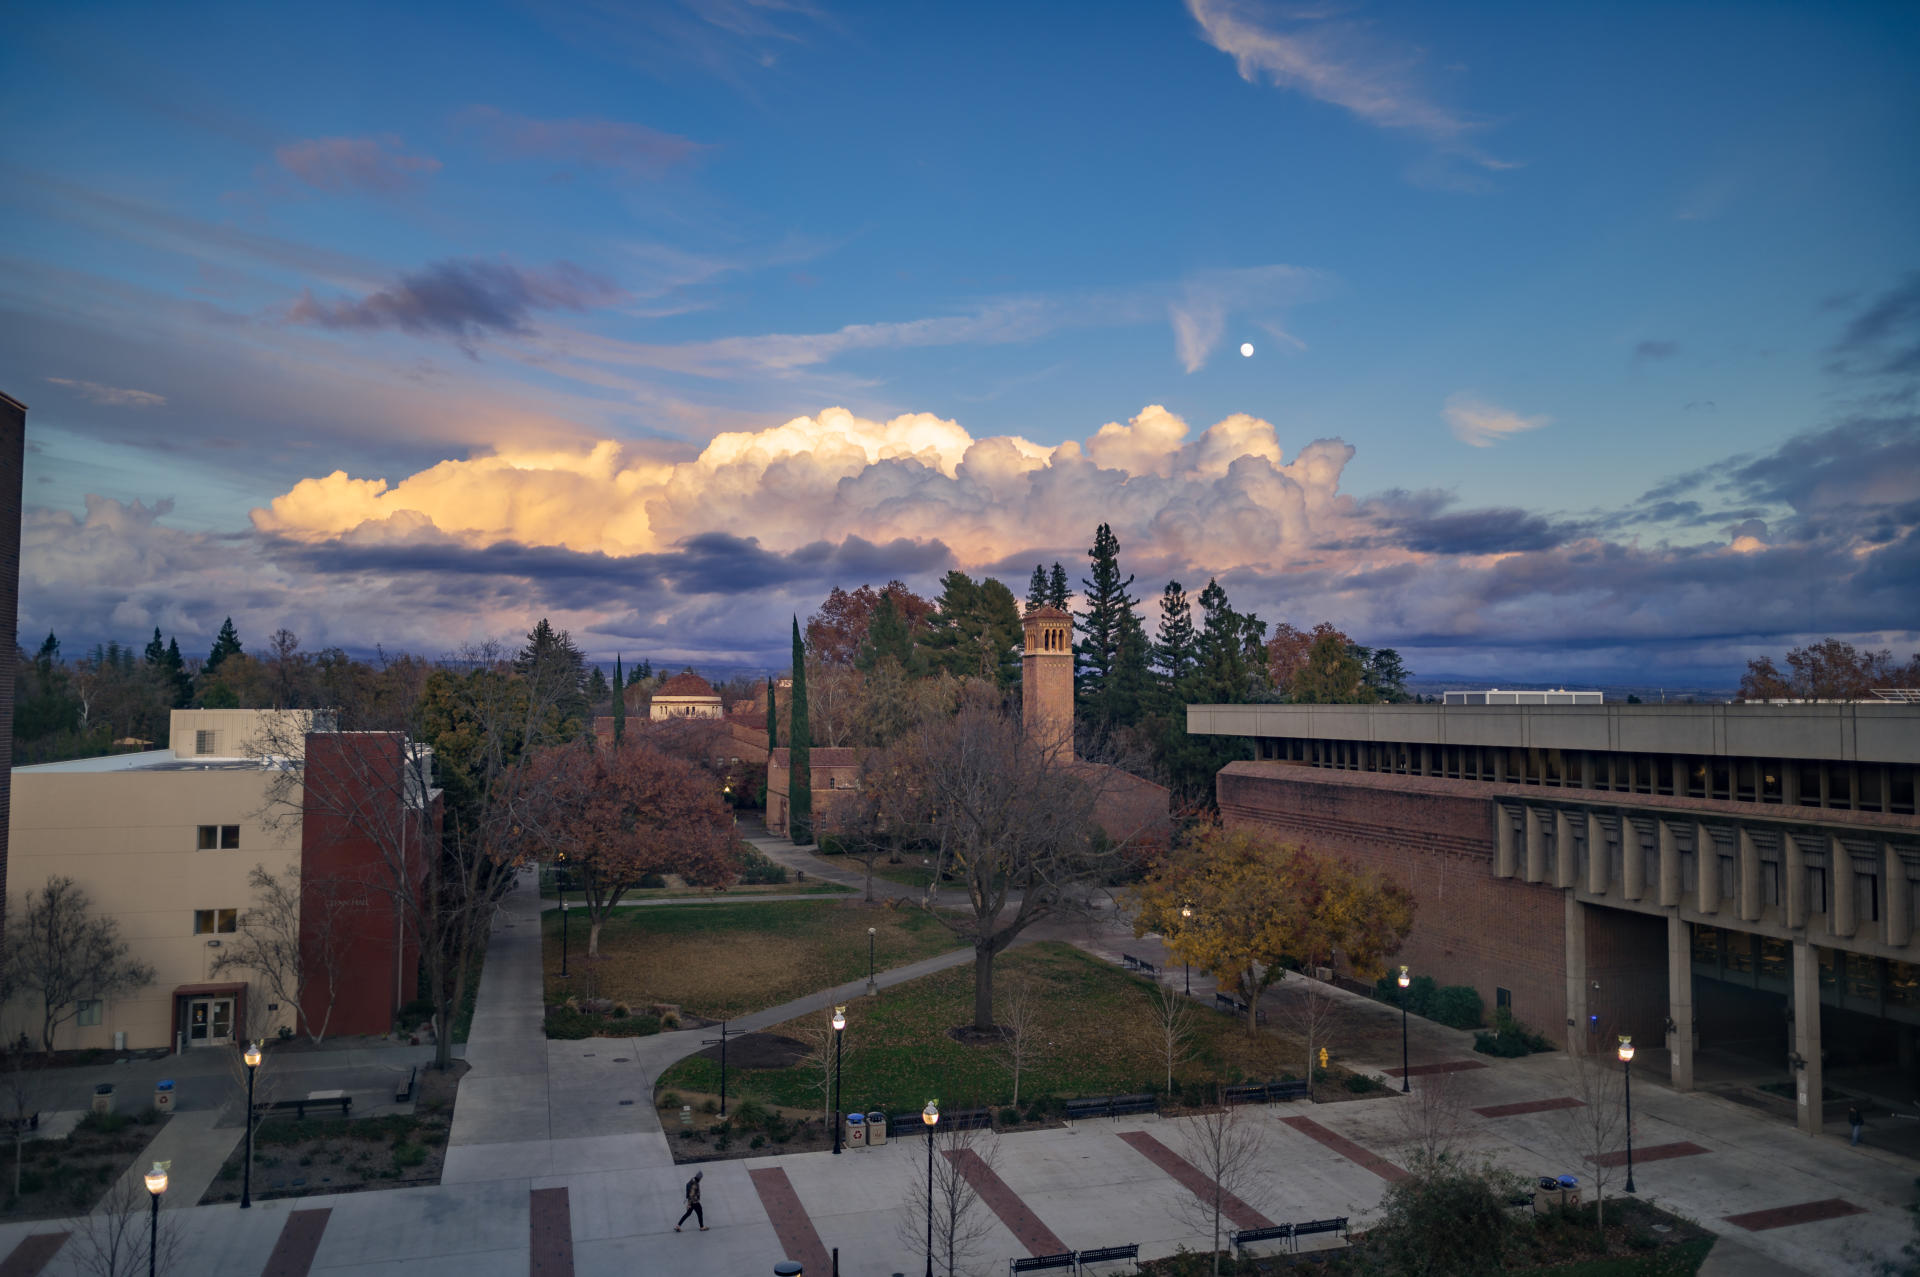 Storm clouds hover over a college campus